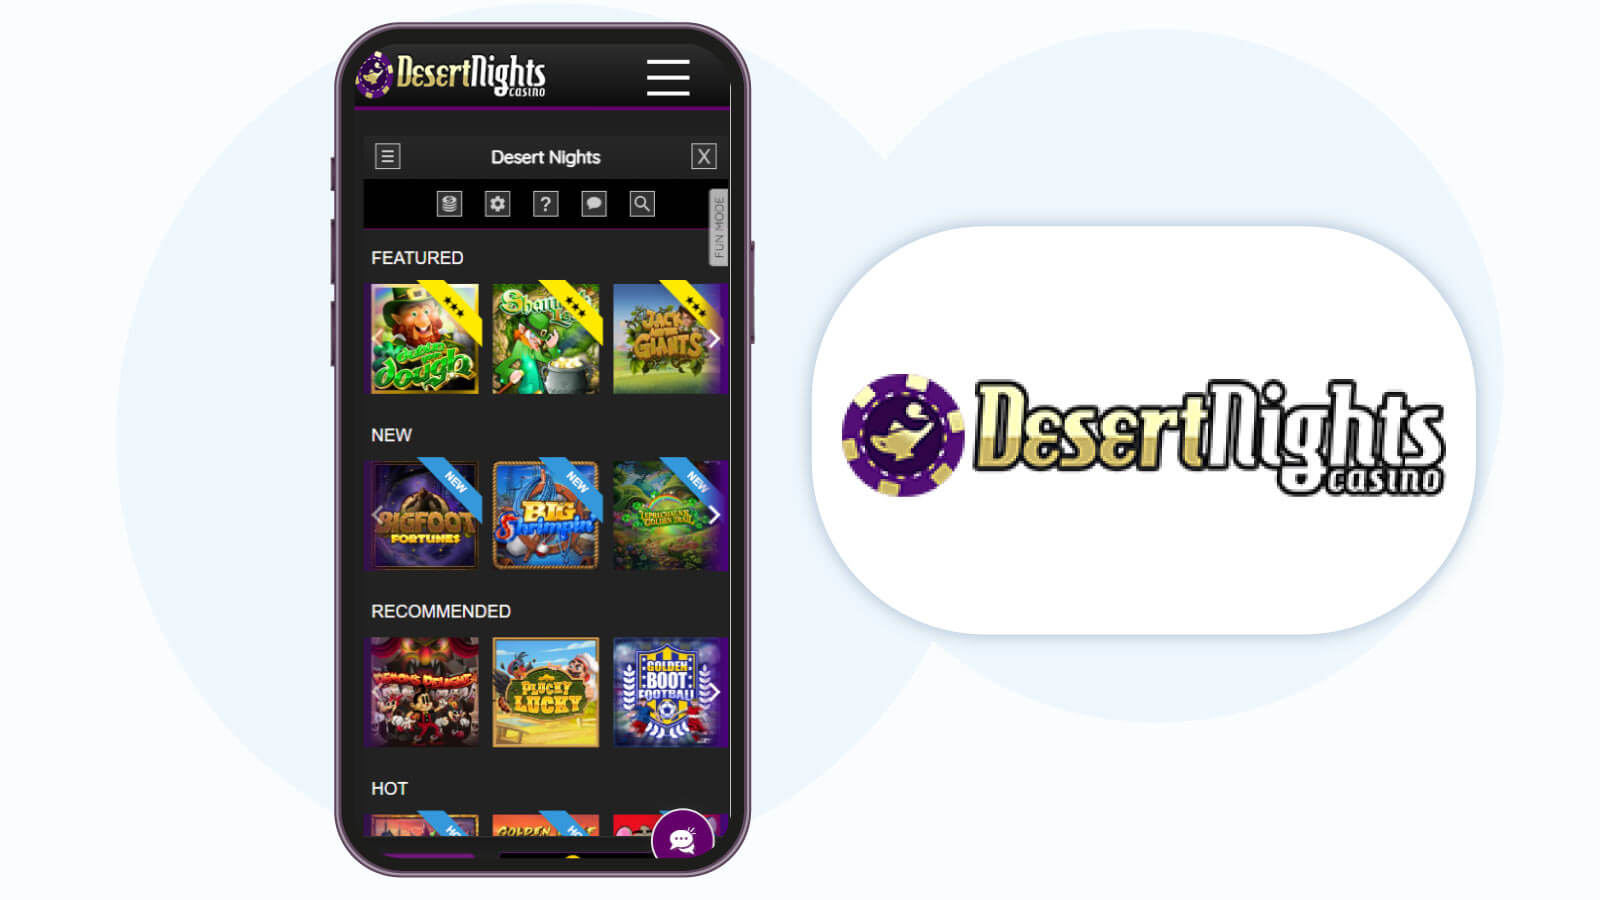 DesertNights Casino Top 100 Free Spins Experienced on Mobile Casino App